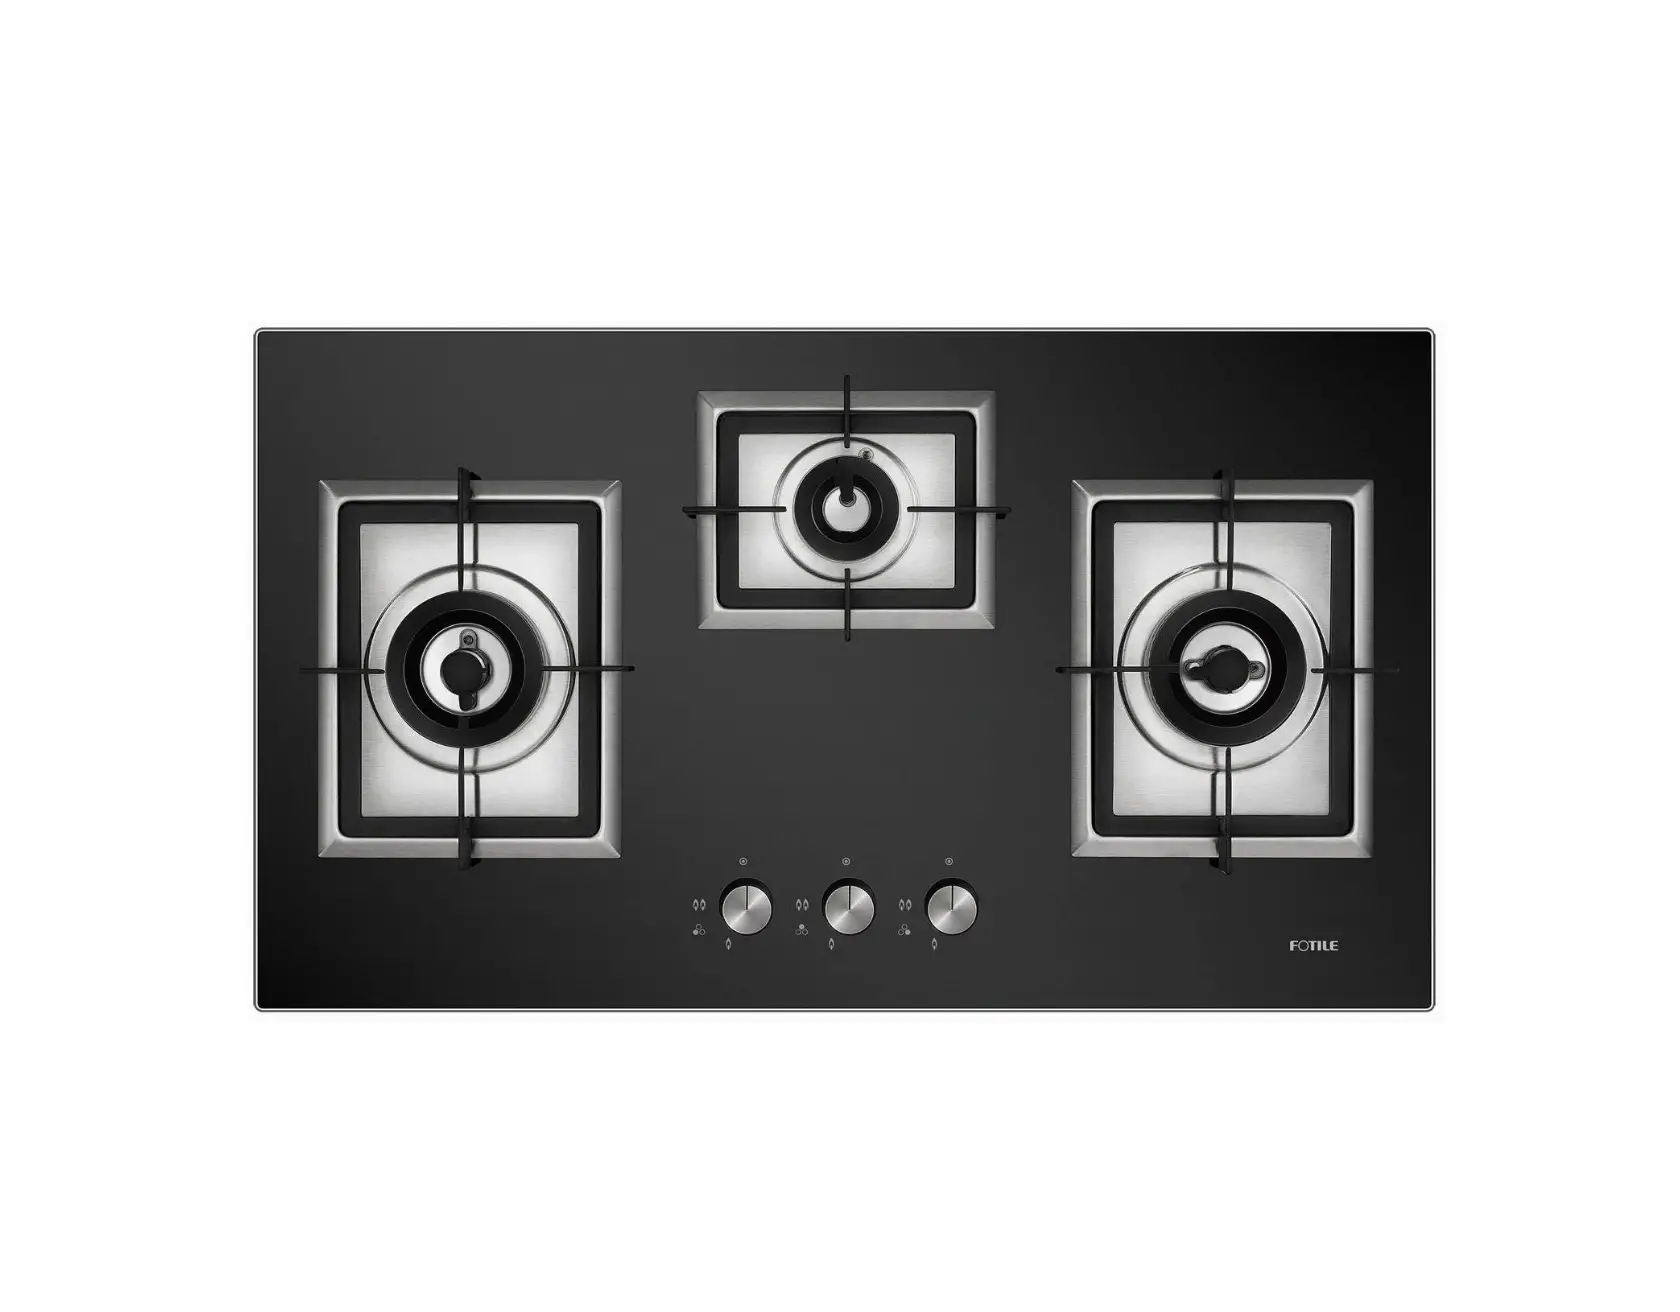 GAS78307, GAG86309 Built In Gas Cooktop